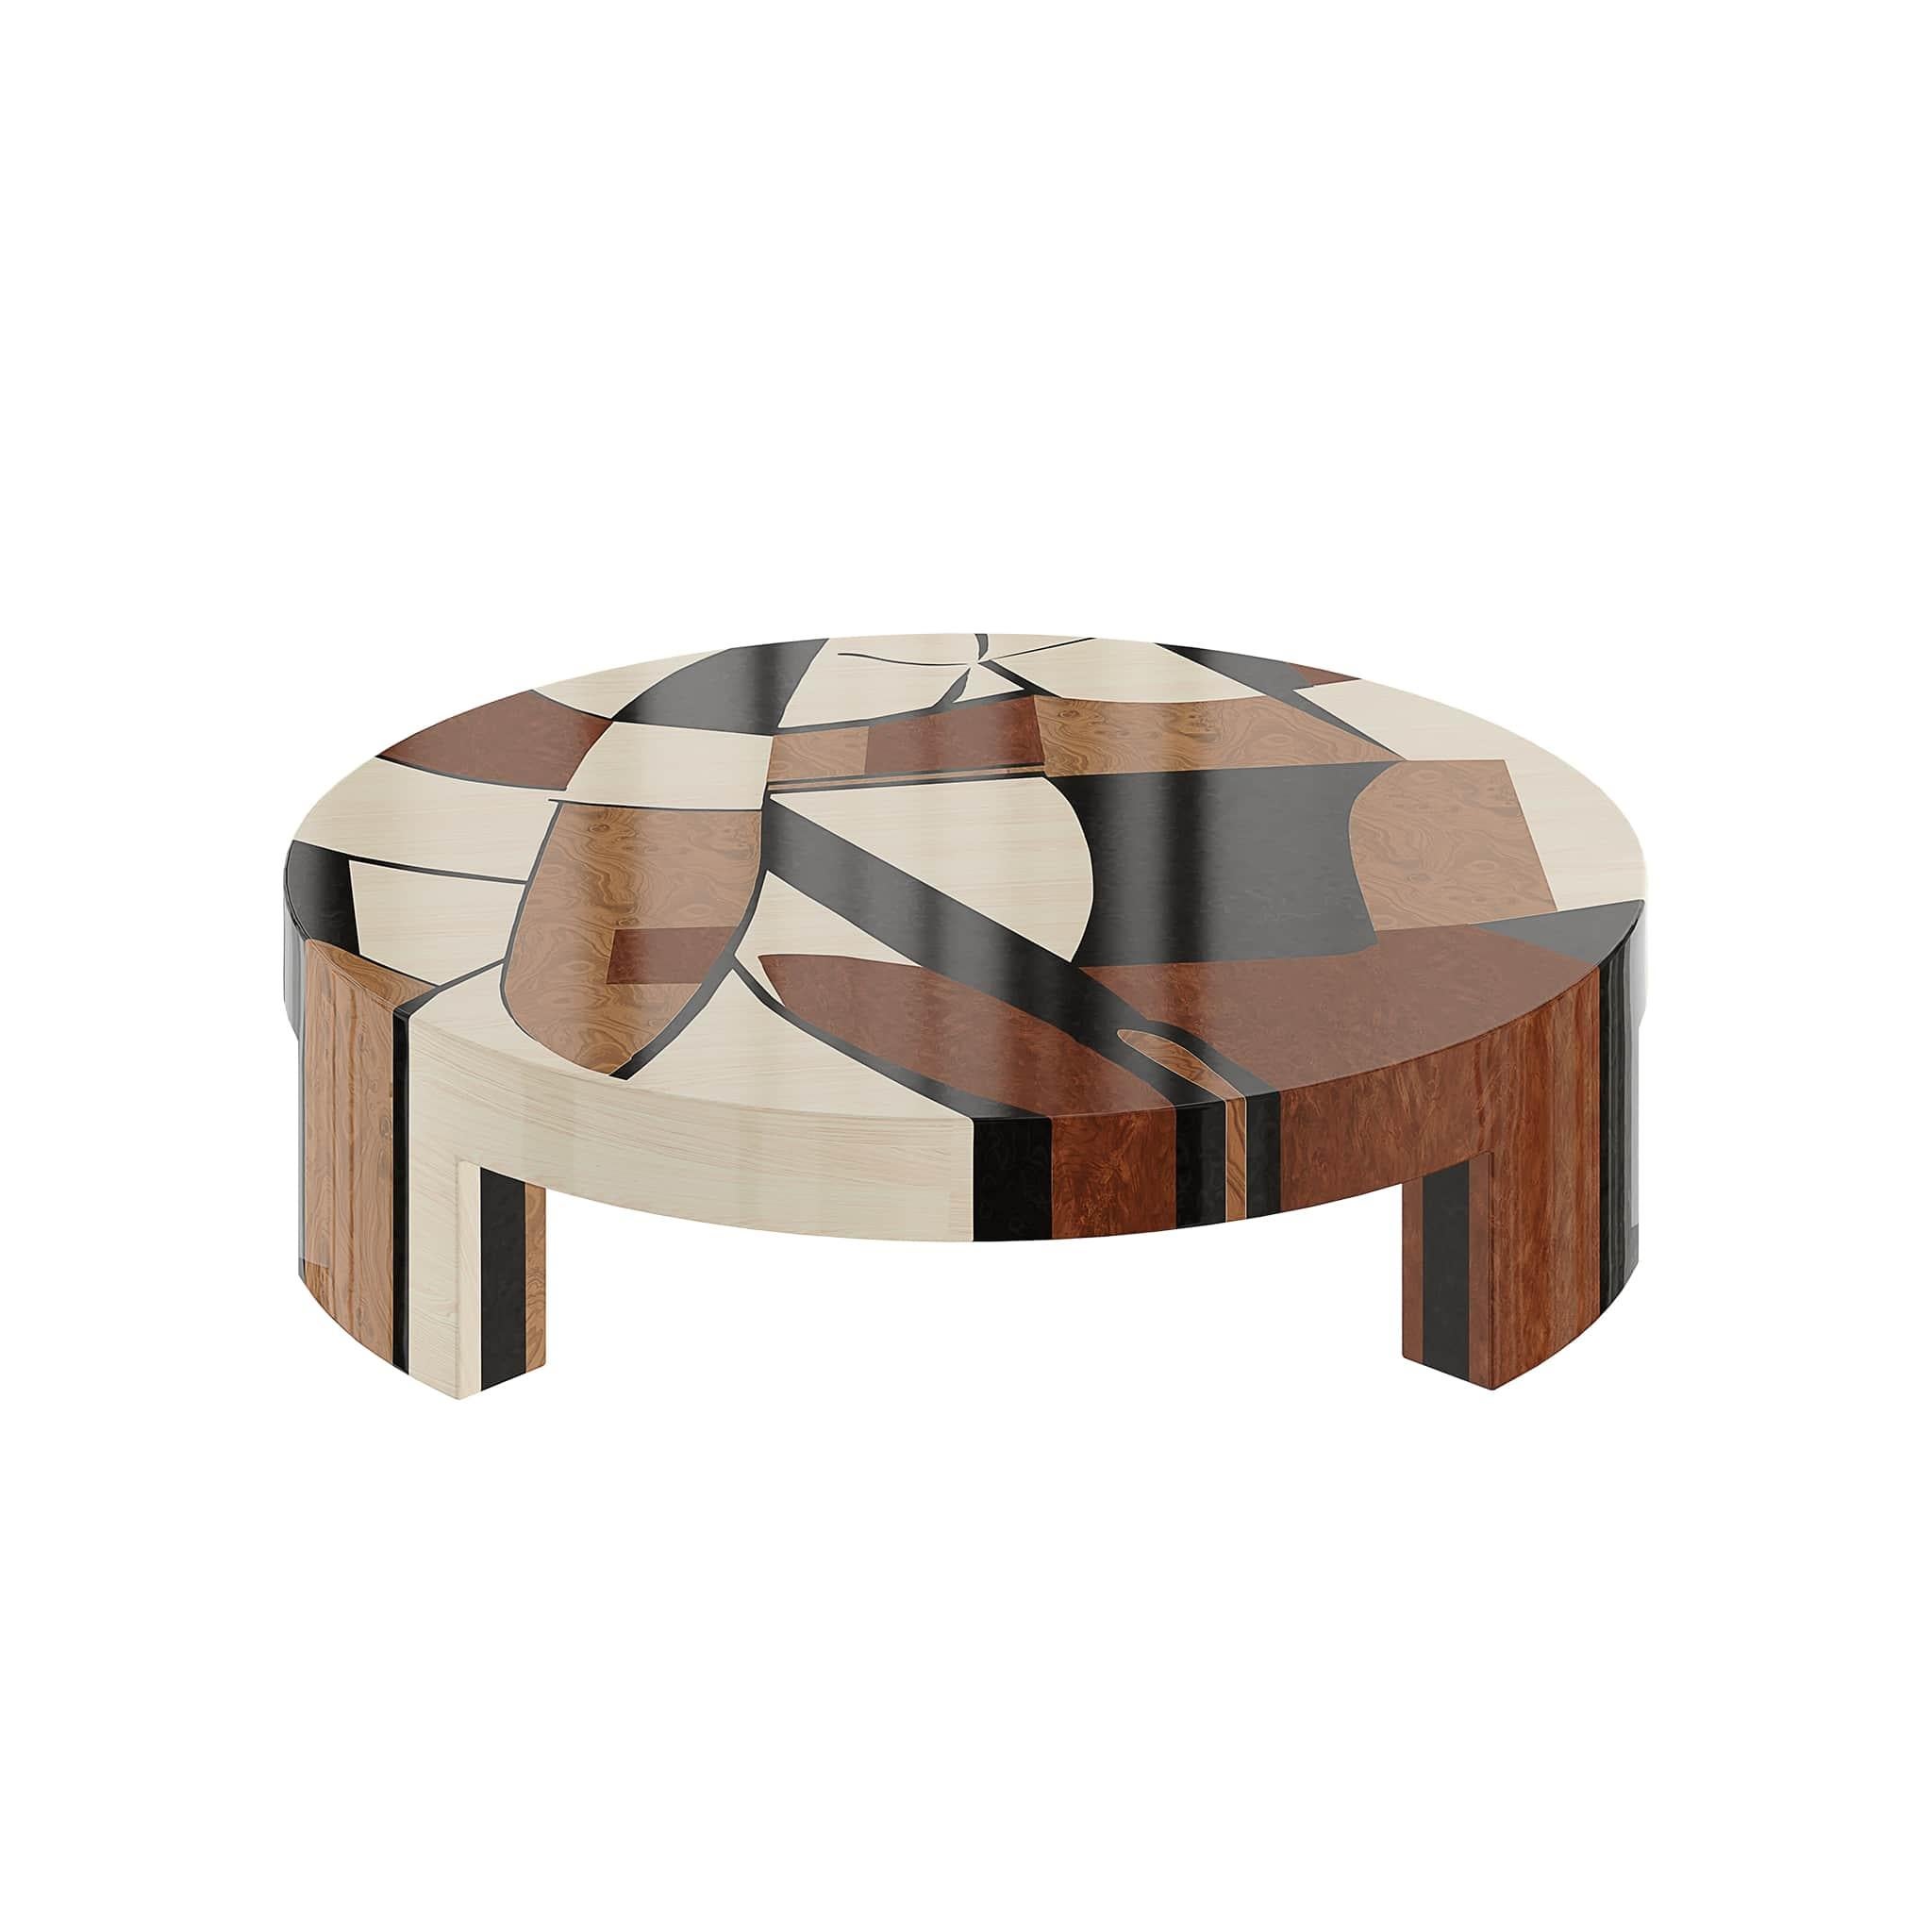 Austria Center Table is a stylish assembly of different types of wood. With a sincere texture, the marquetry coffee table is the pièce de résistance of a nature-inspired interior.  Style this remarkable accent table with Austria Side Table for